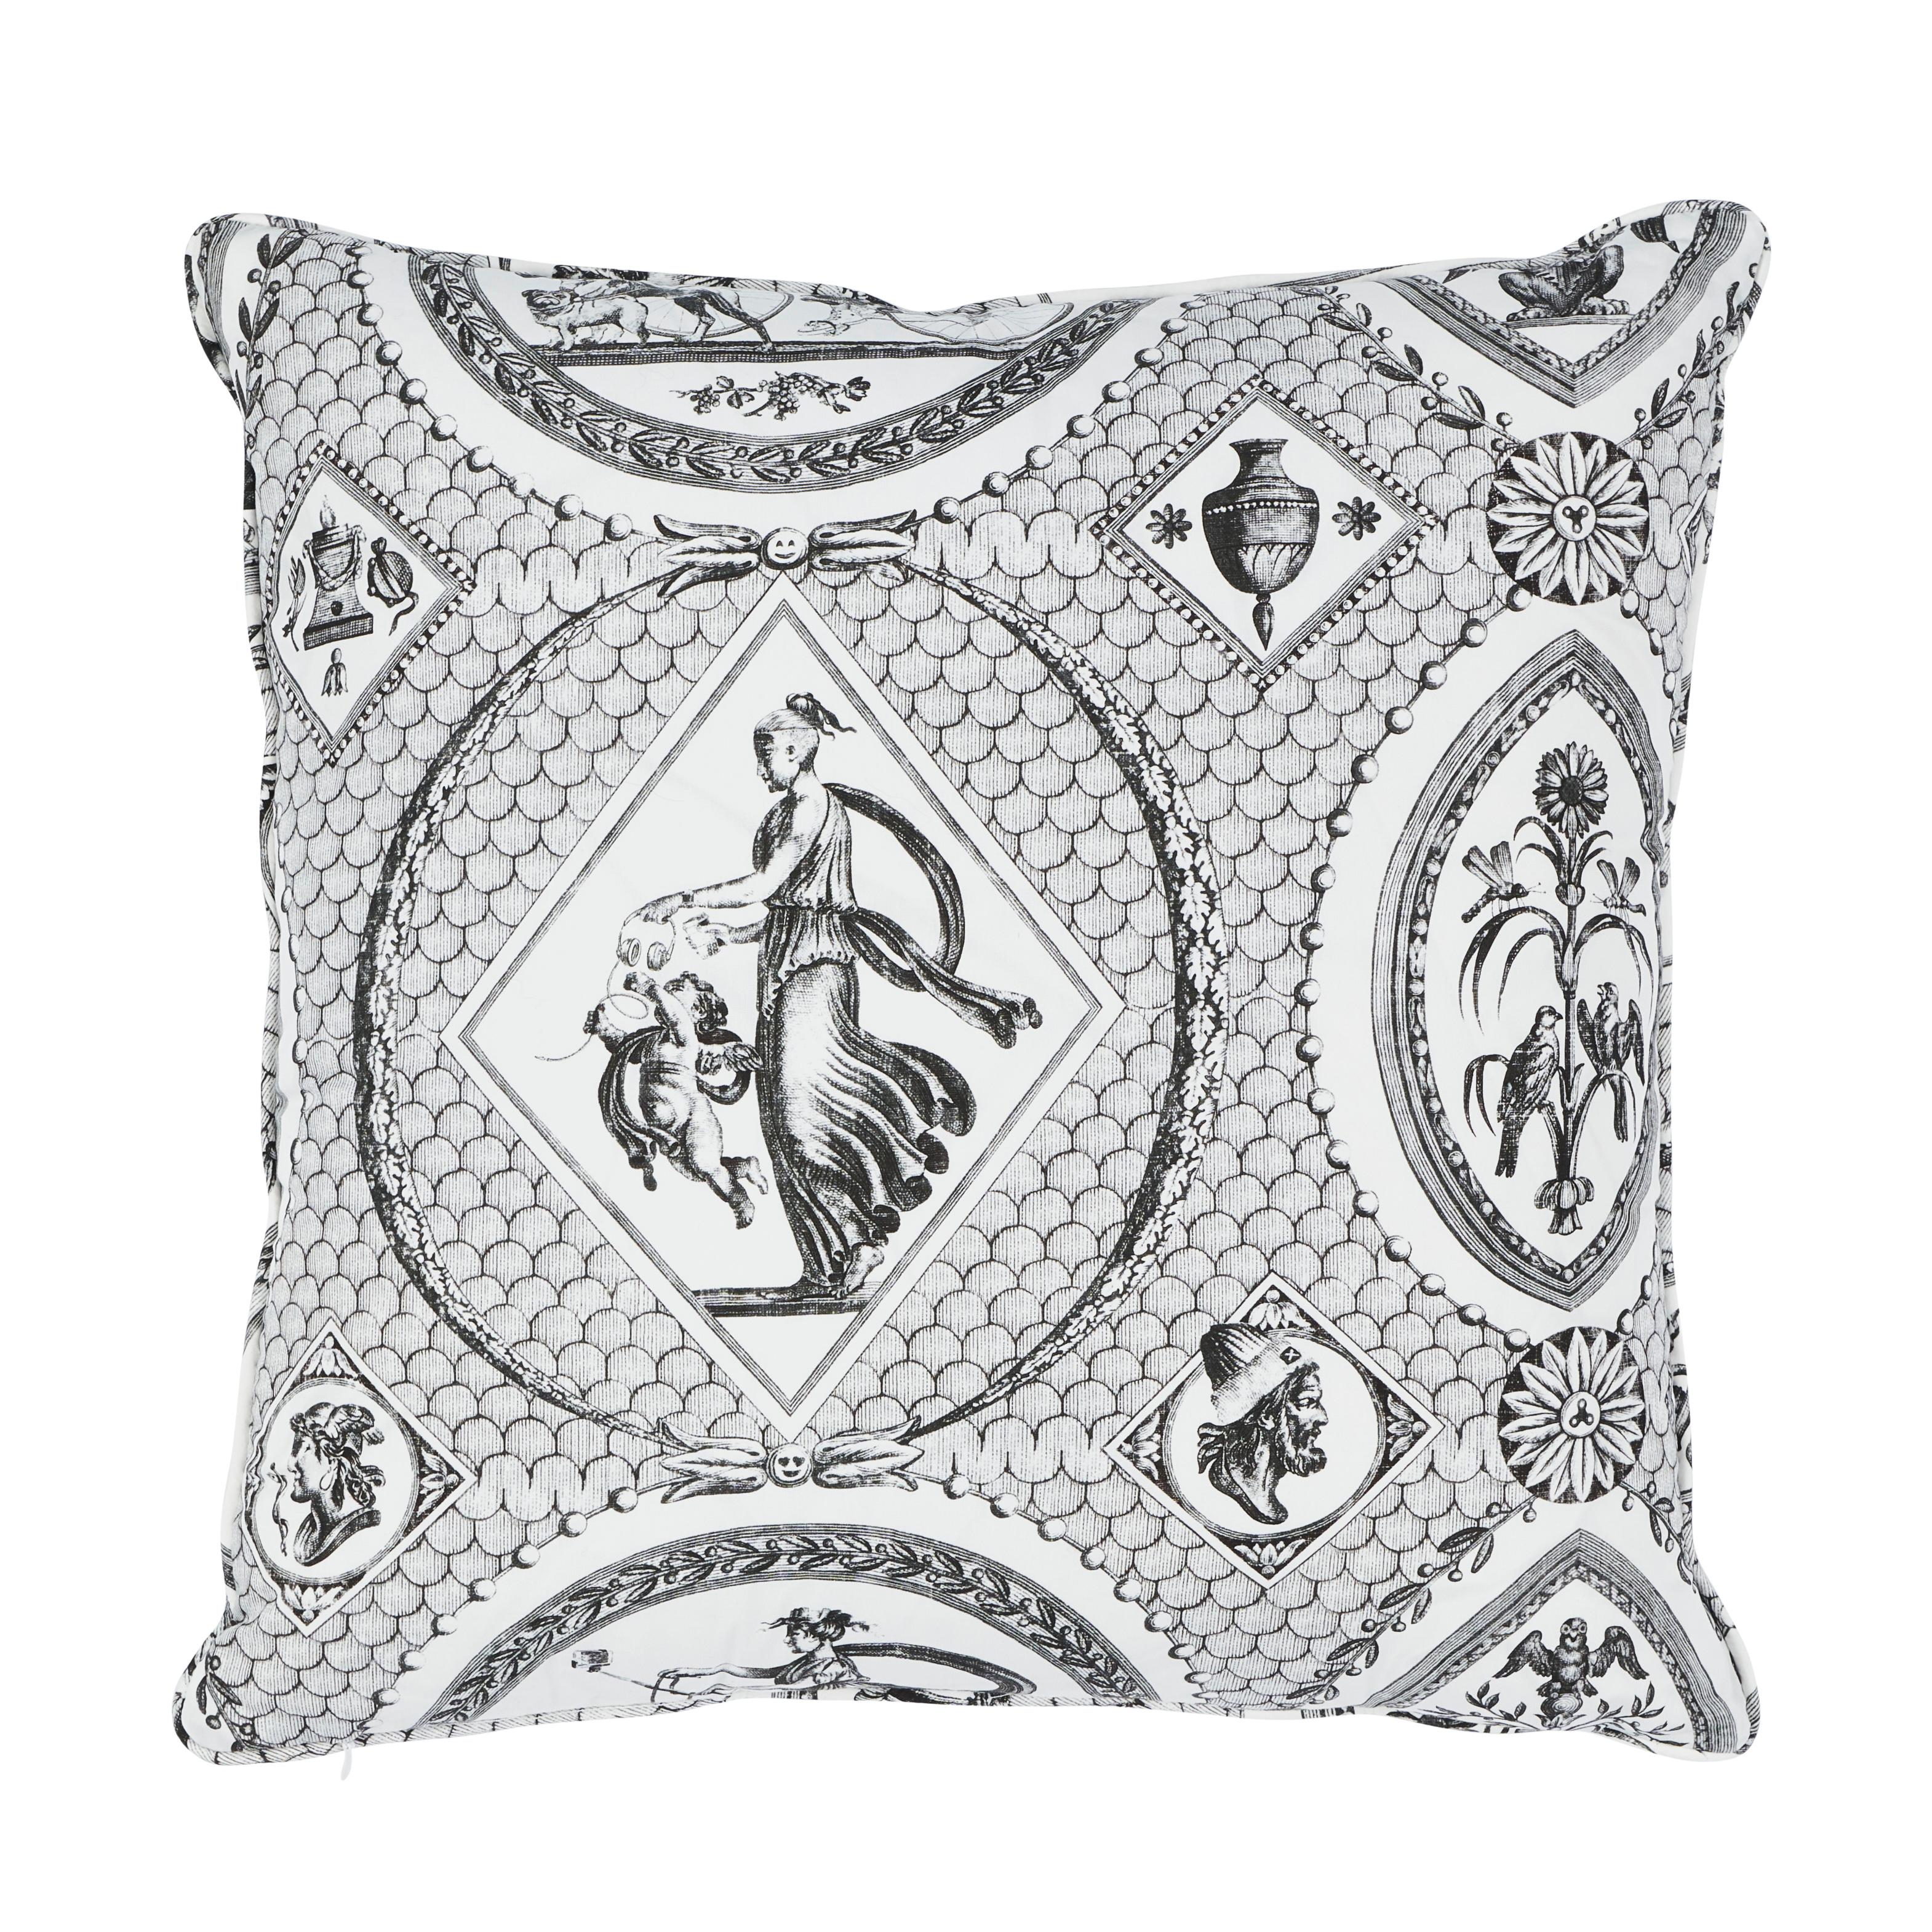 This pillow features Les Scenes Contemporaines with a self welt finish. For a tongue-in-cheek take on antiquity, our in-house artists modernized an 18th-century Jean-Baptiste Hu√´t pattern by seamlessly embedding playful contemporary